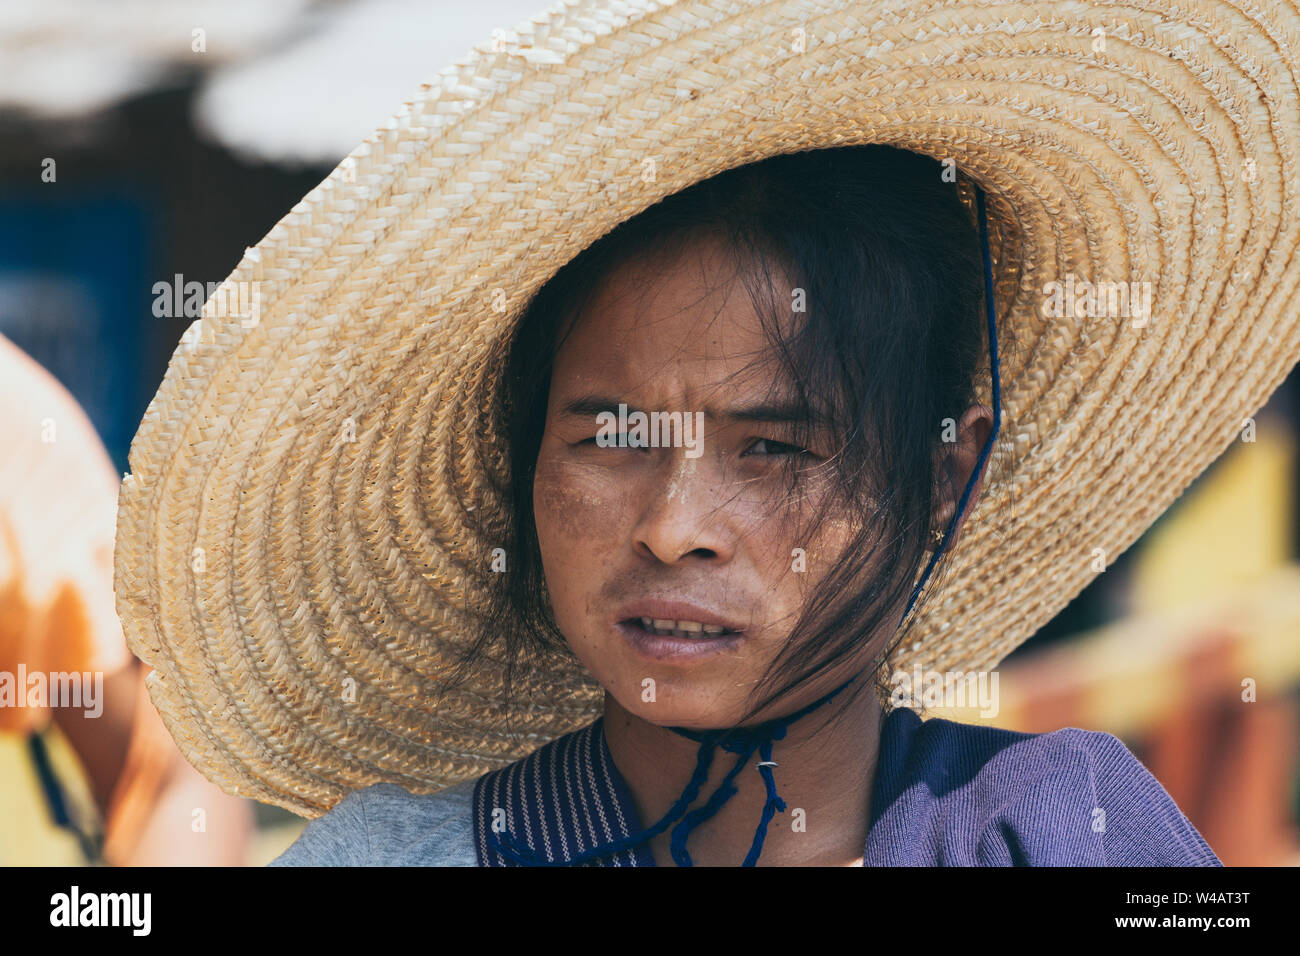 Indein, Myanmar - March 2019: portrait of a young Burmese woman in a big straw hat and tanaka on her face Stock Photo